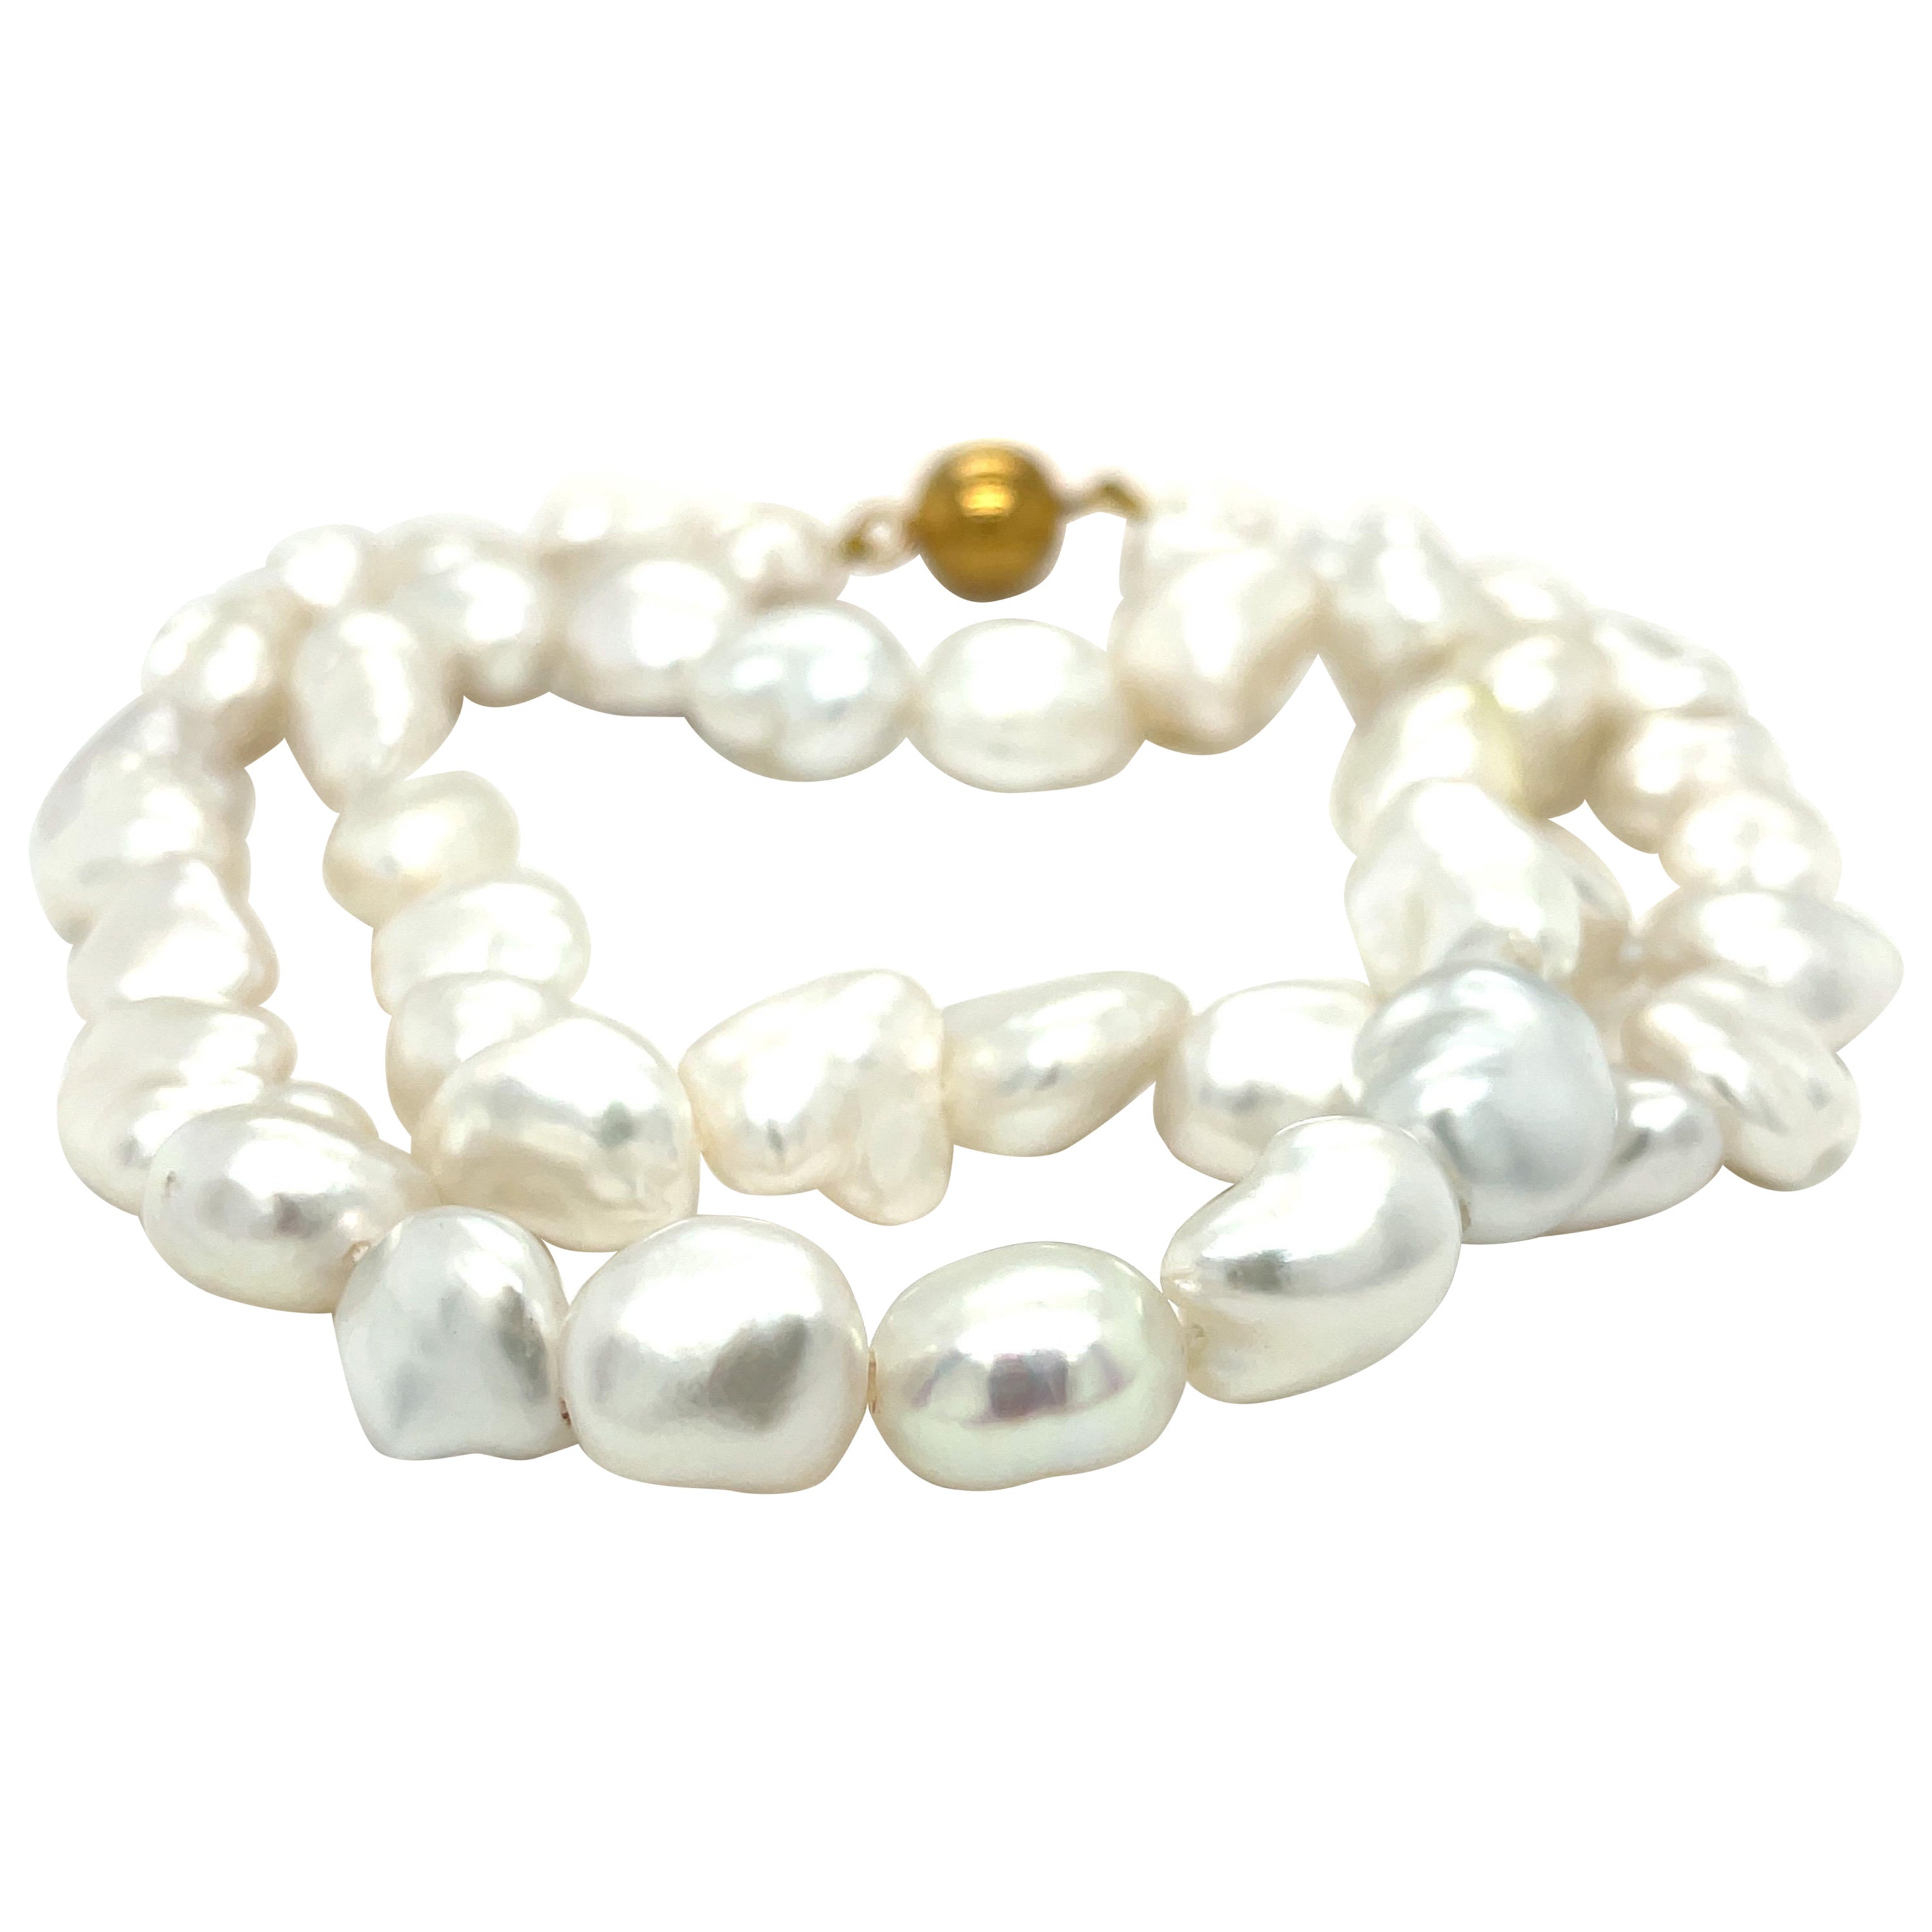 Cream Keshi Pearl Necklace with Yellow Gold Plated Magnetic Ball Clasp For Sale